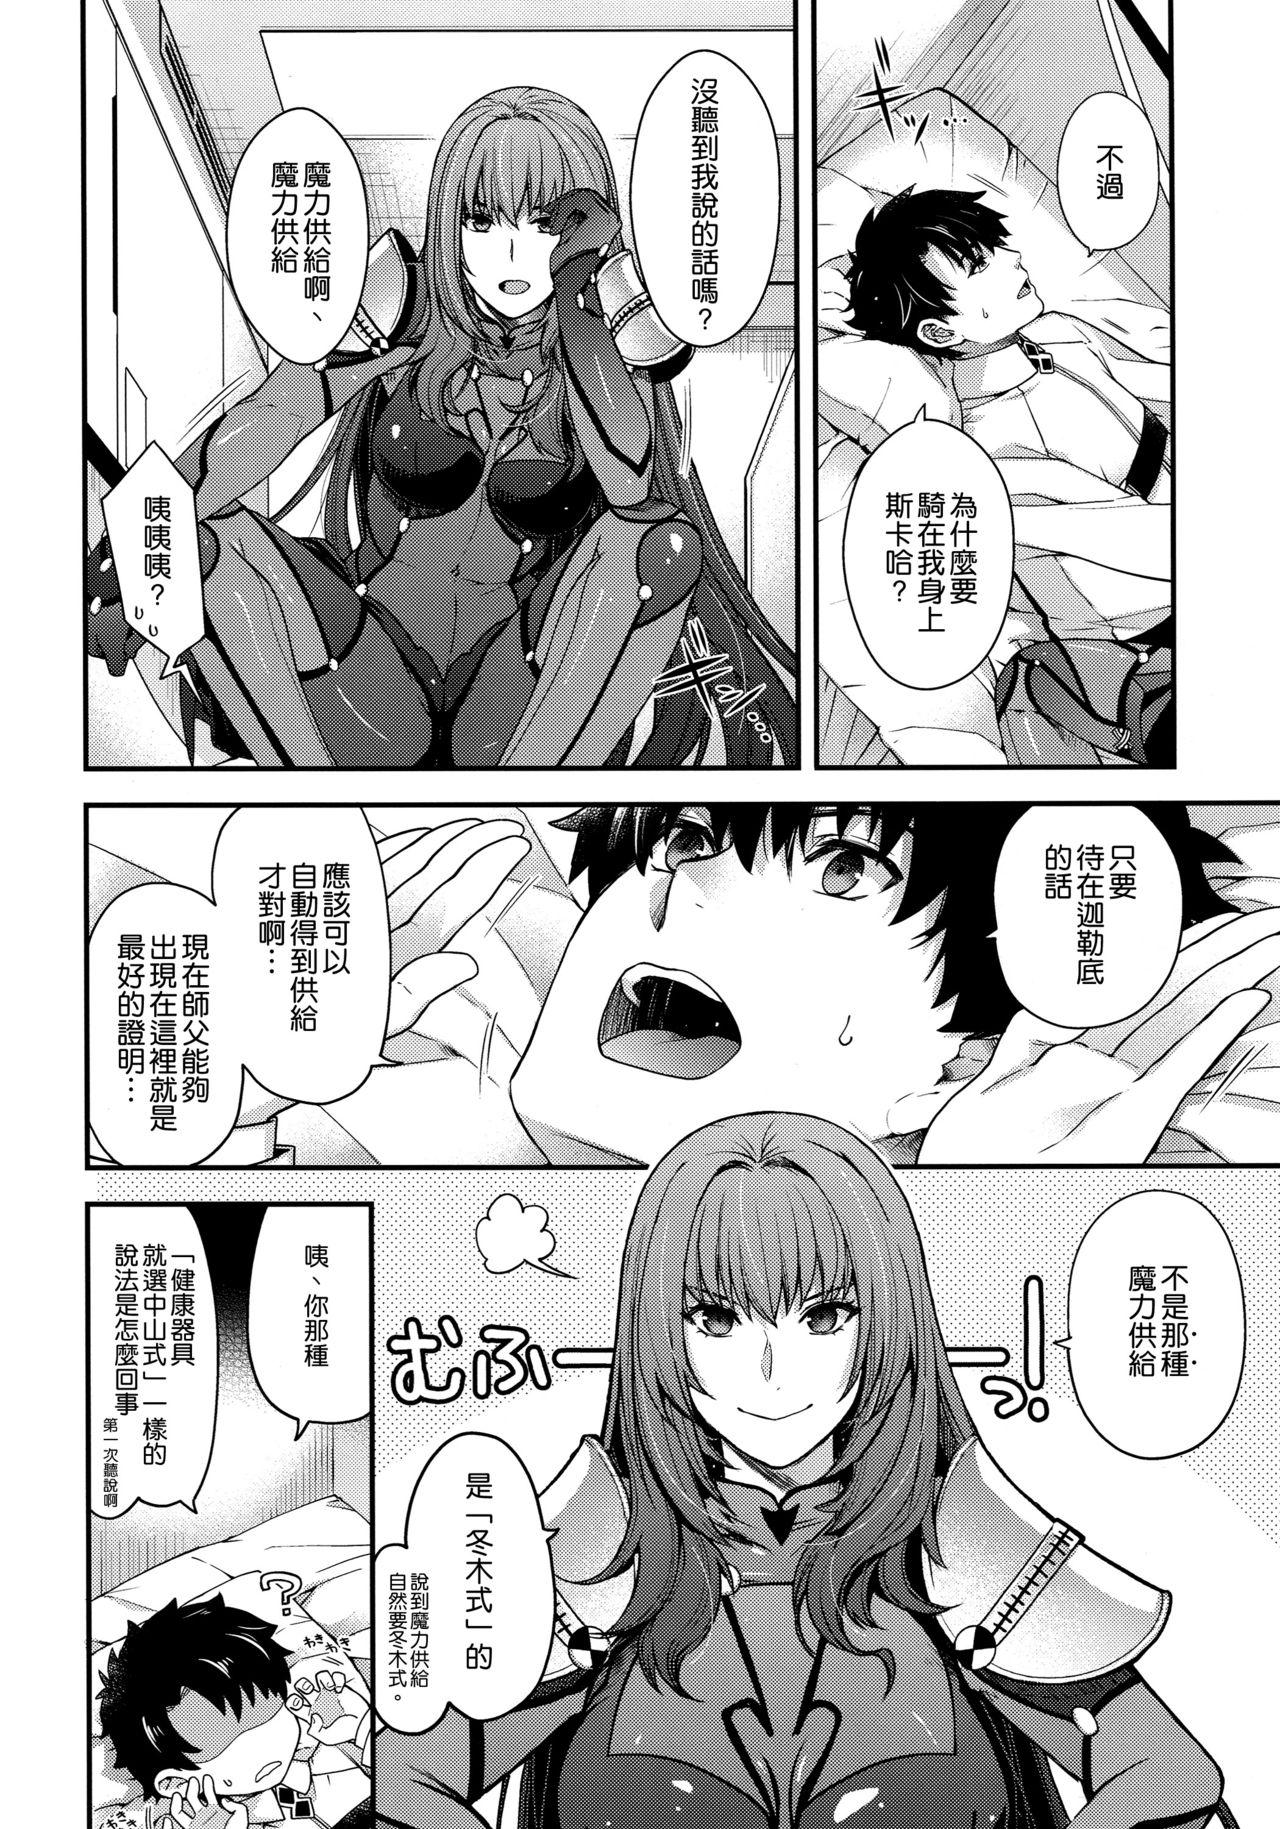 Blow Jobs parthas - Fate grand order Dick Sucking - Page 4